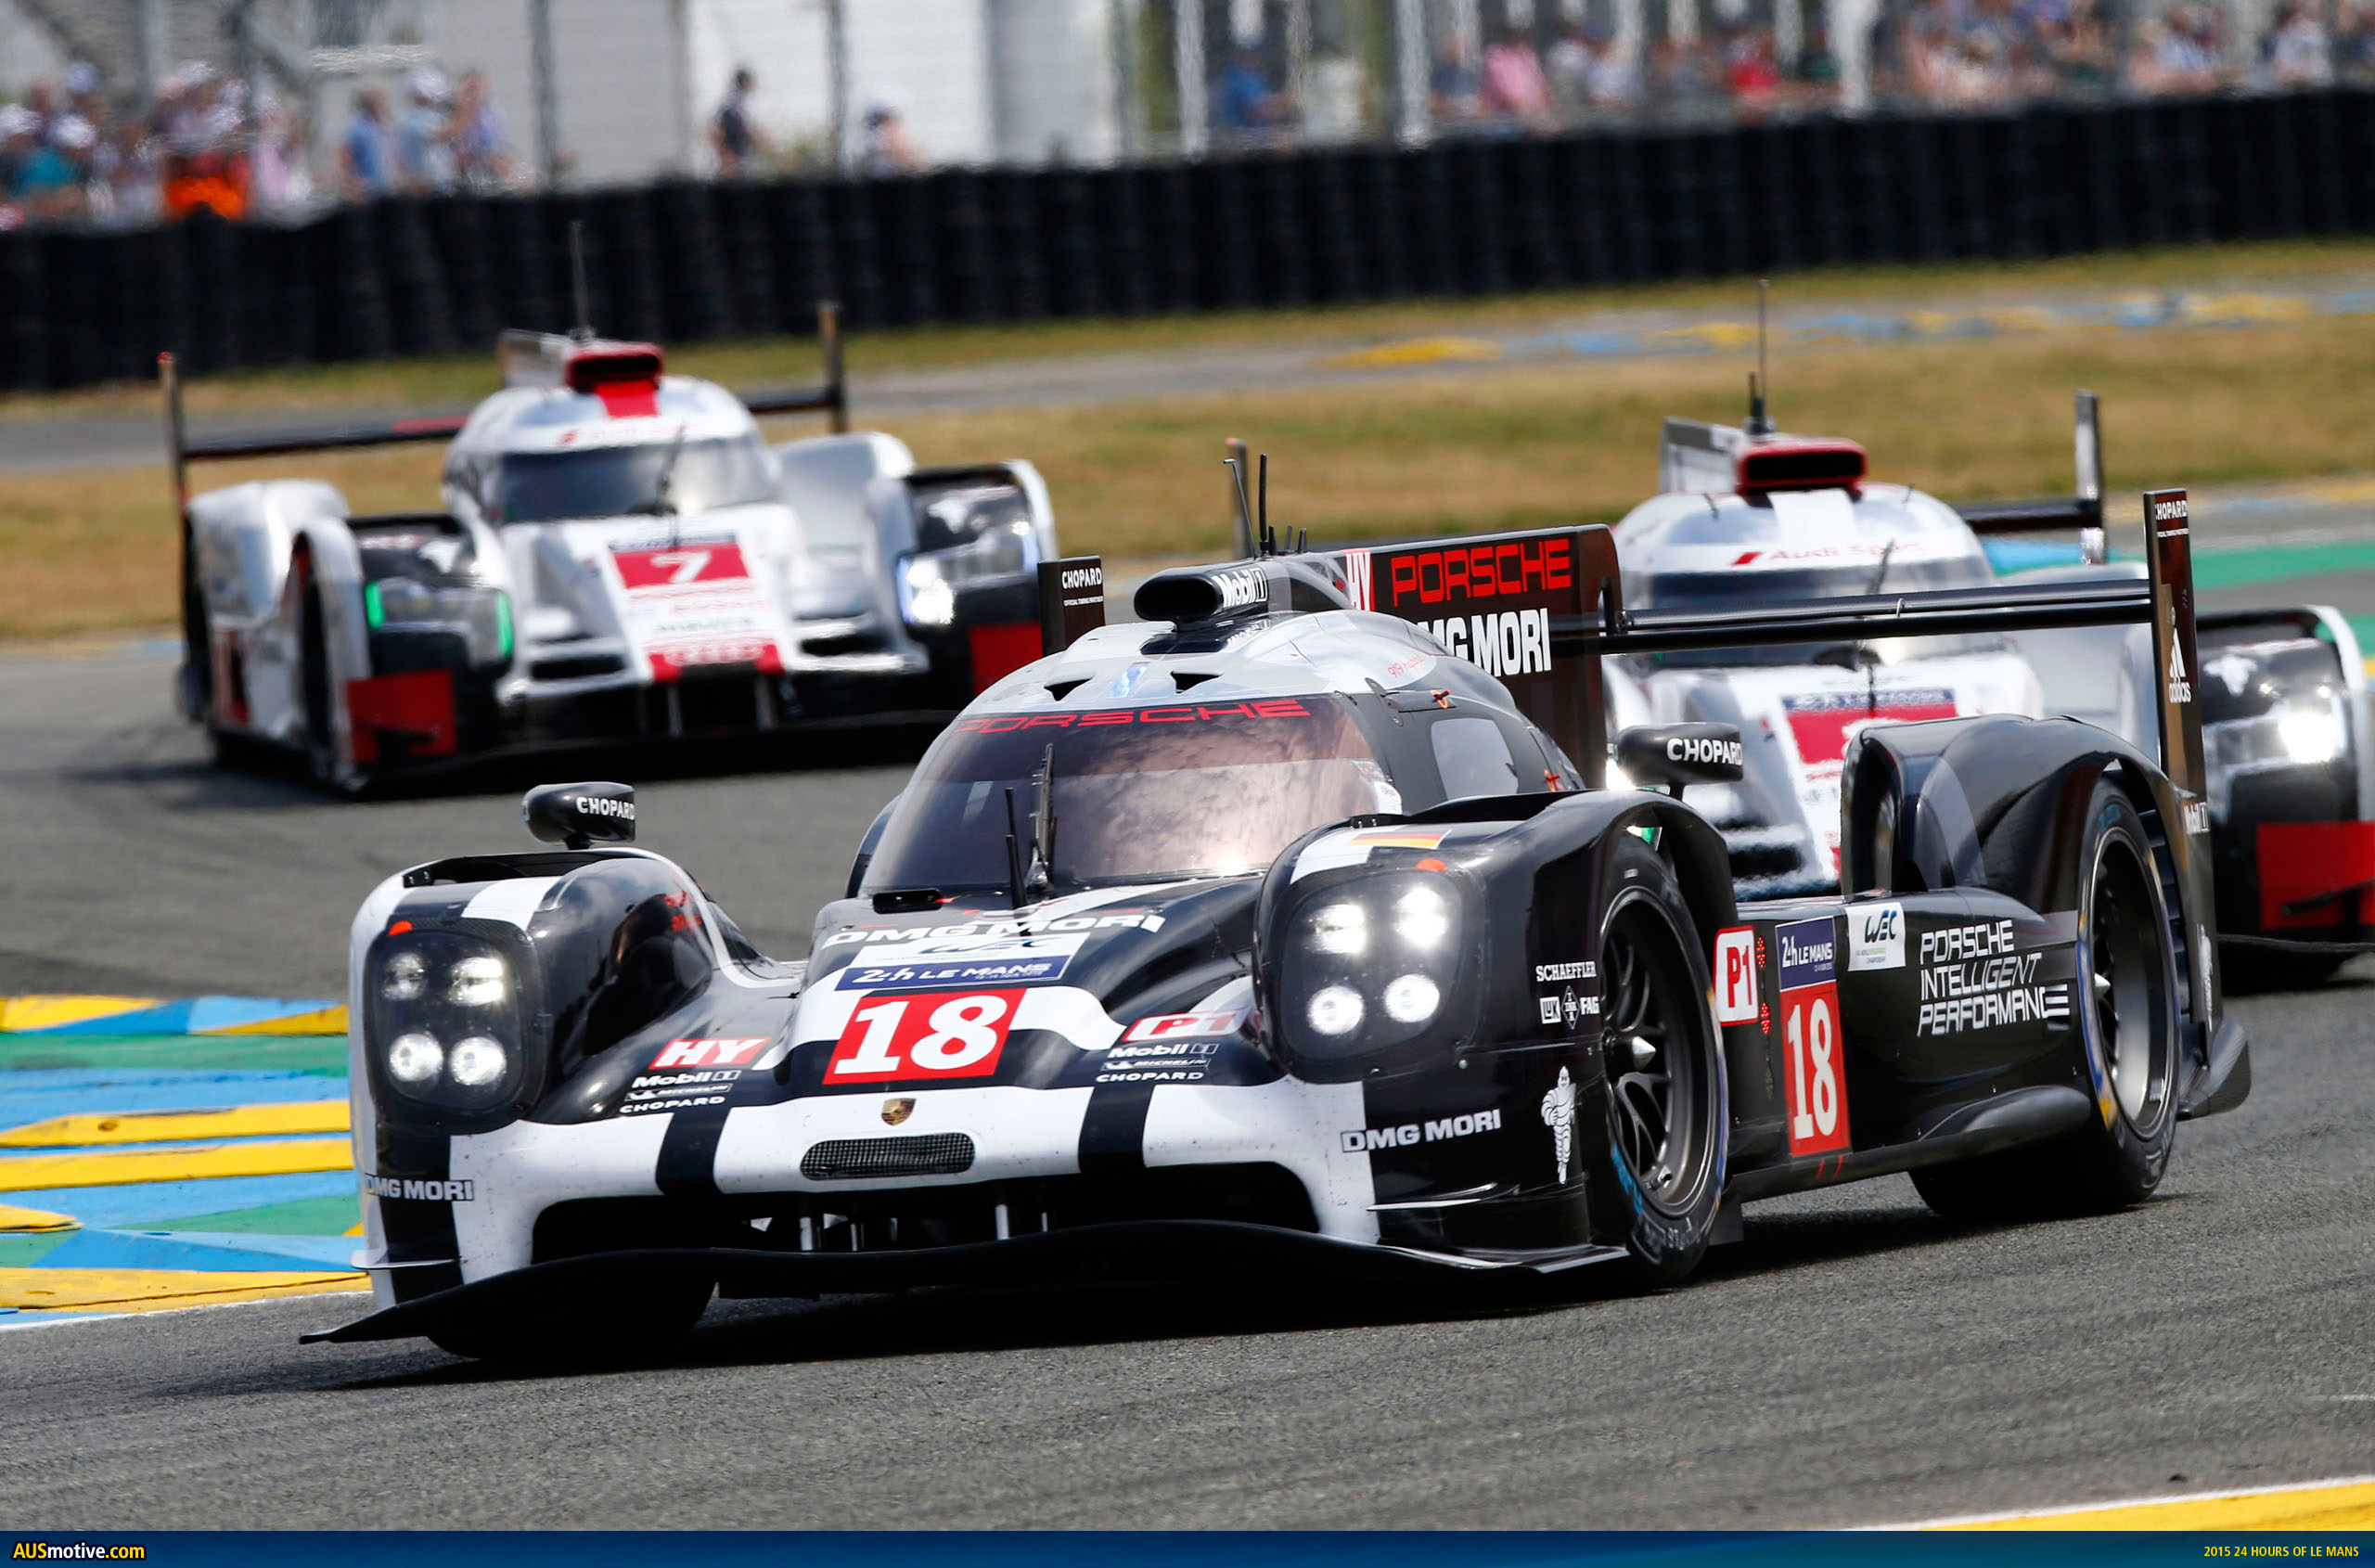 2015 Lm24 Porsche Claims Win Number 17